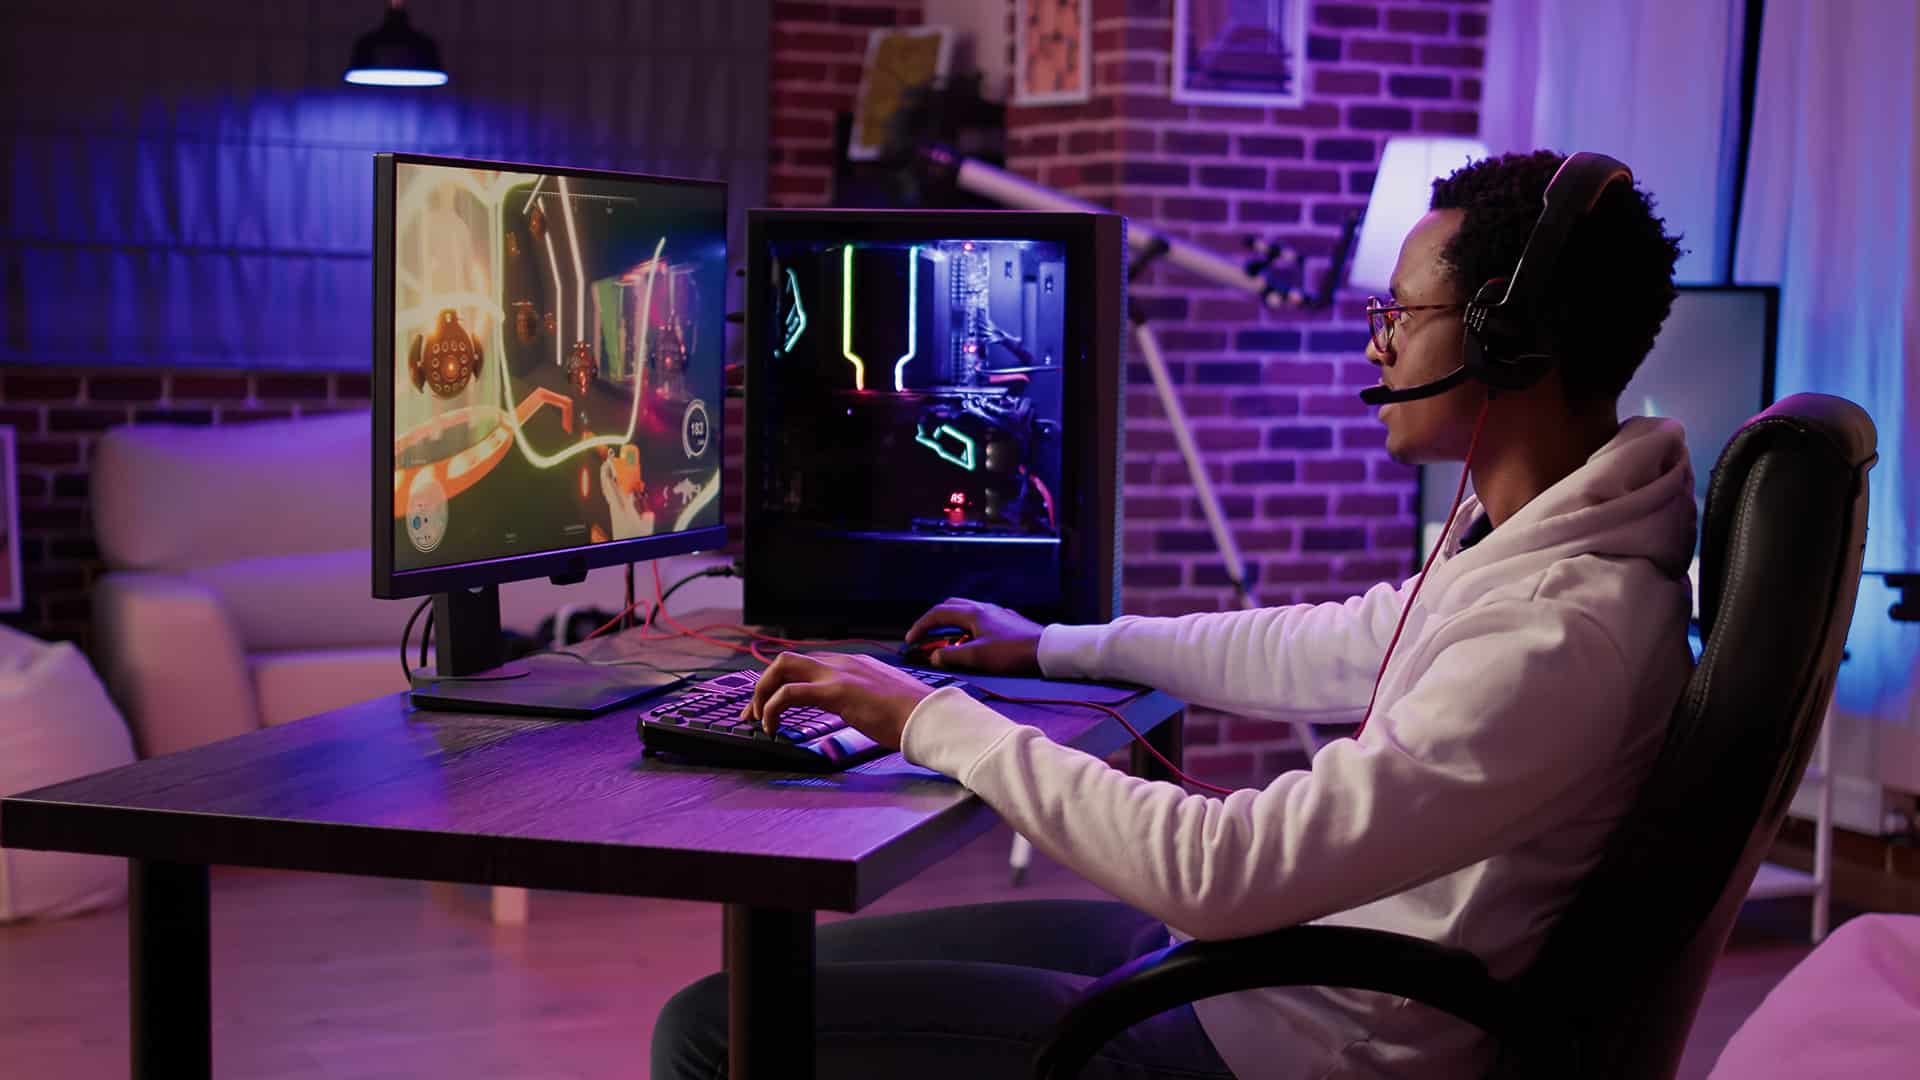 Gamer playing online using a high-end computer setup